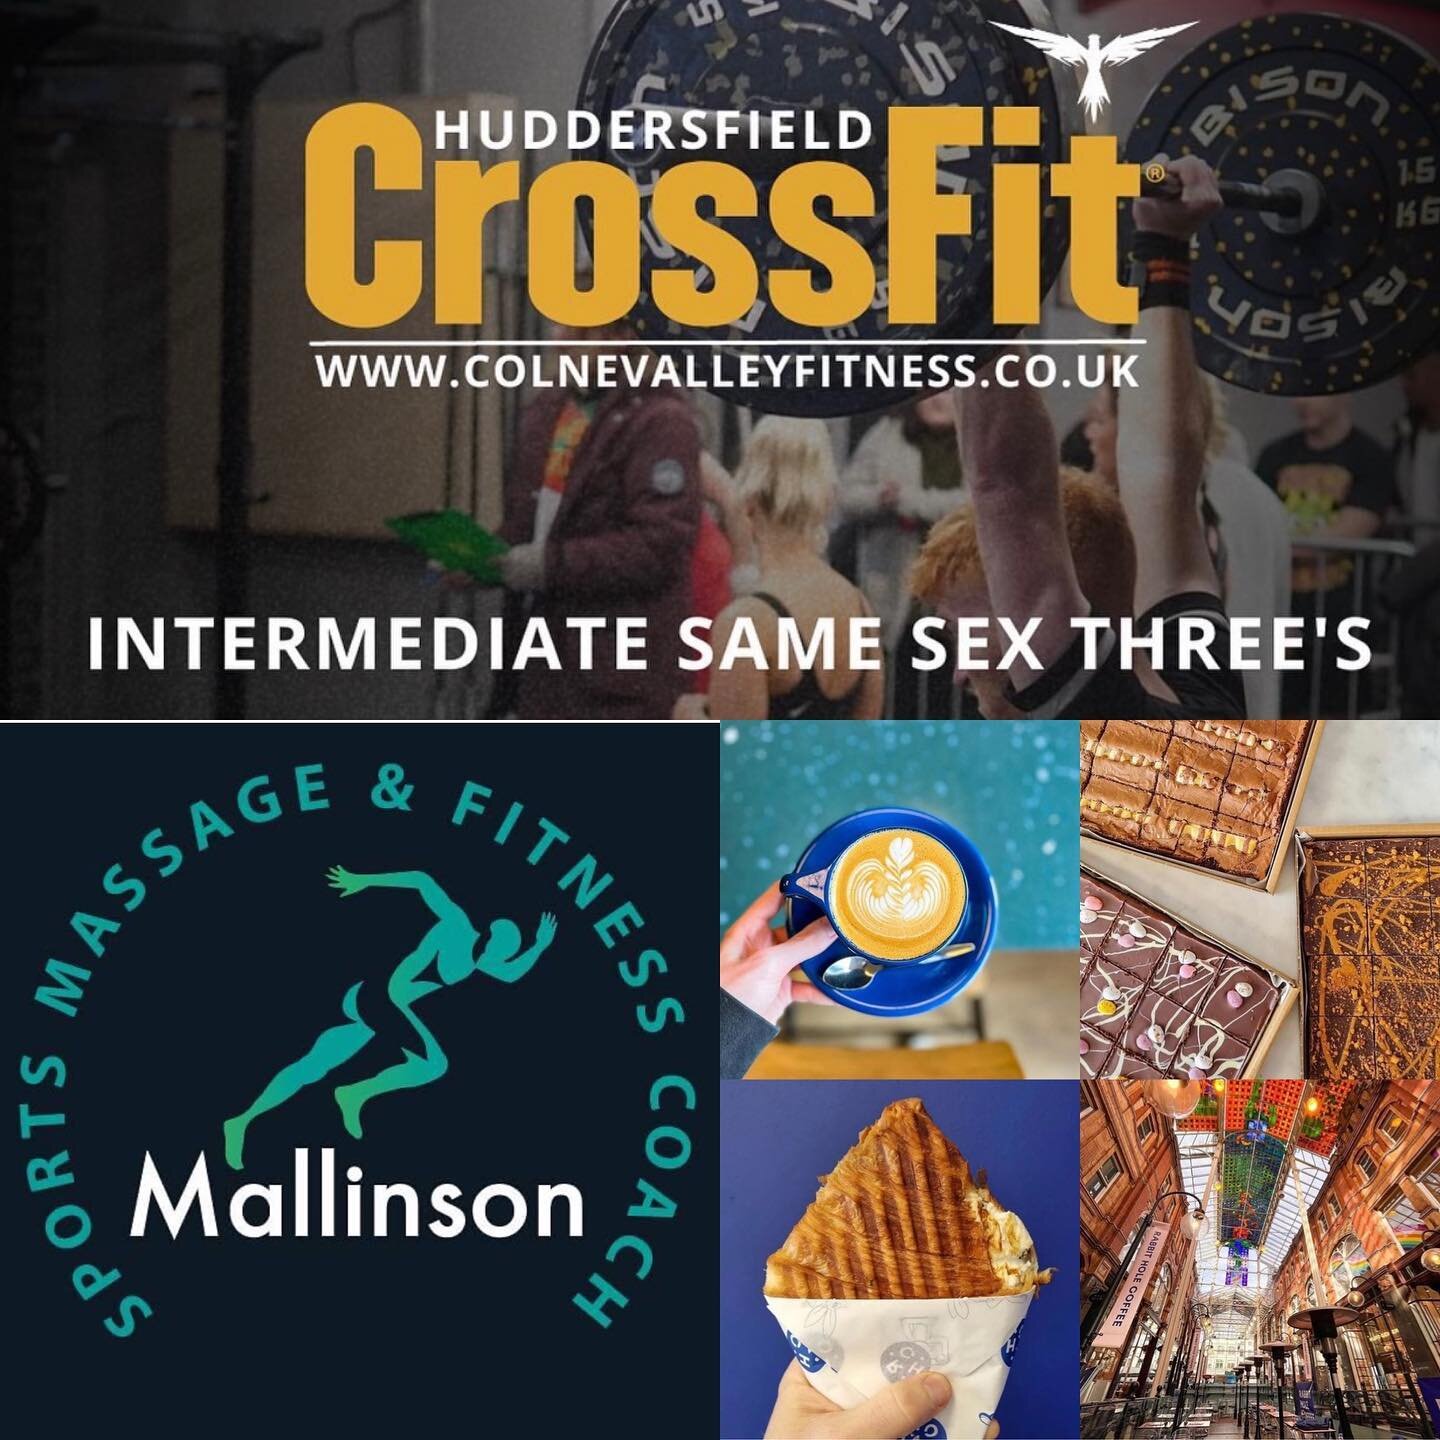 Just 1 space remaining!!
Intermediate Same Sex Three&rsquo;s
On the day we have Mallinson Sports Therapies offering spot treatments at just &pound;5.
We also have Rabbit Hole providing coffee, Toasties and Sweet Treats!
Our DJ will be playing some ba